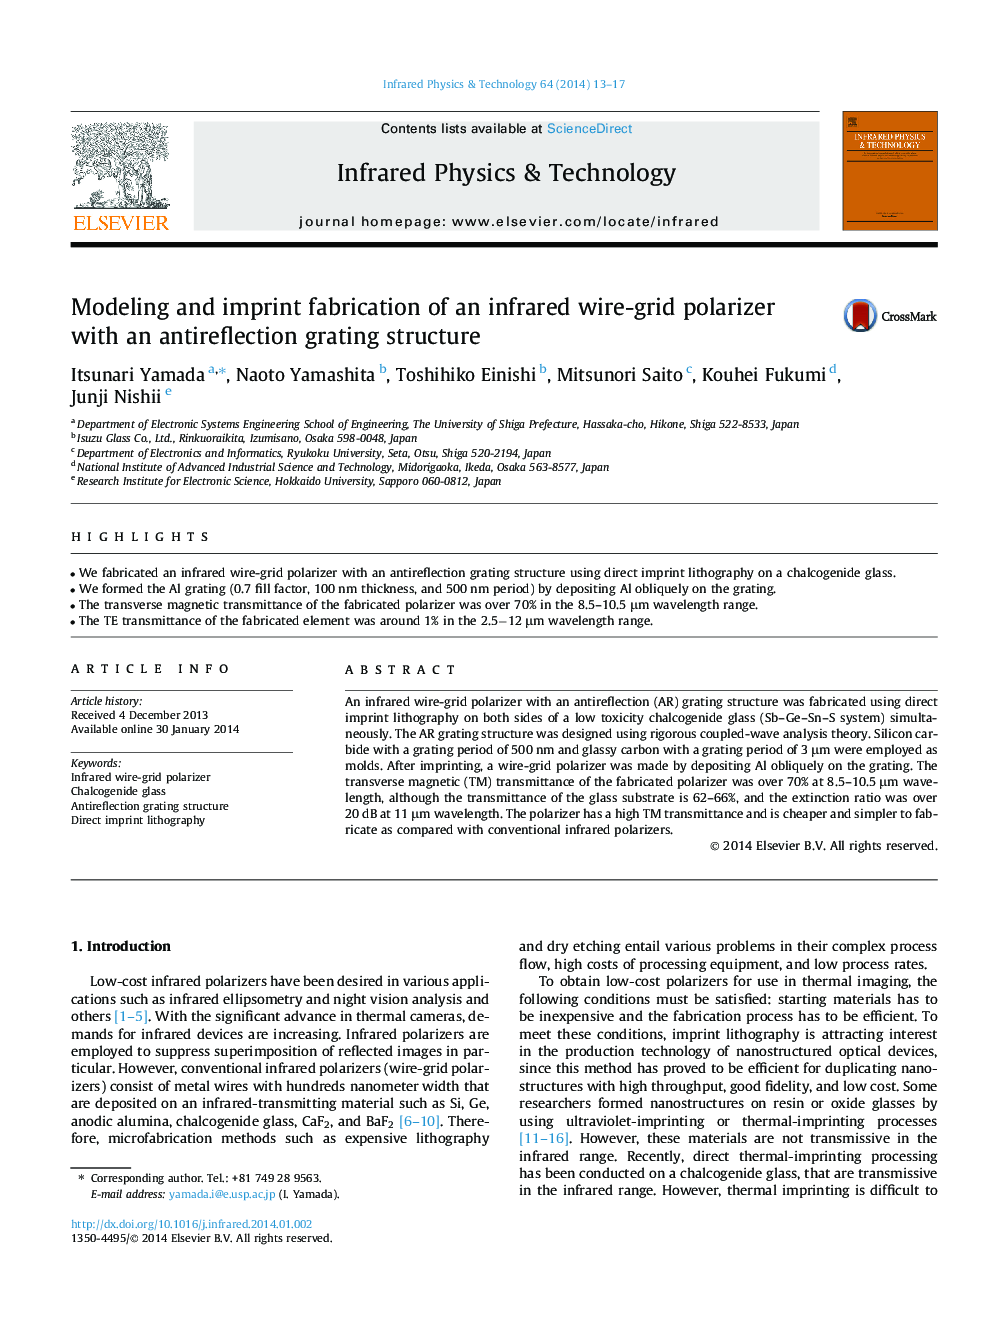 Modeling and imprint fabrication of an infrared wire-grid polarizer with an antireflection grating structure